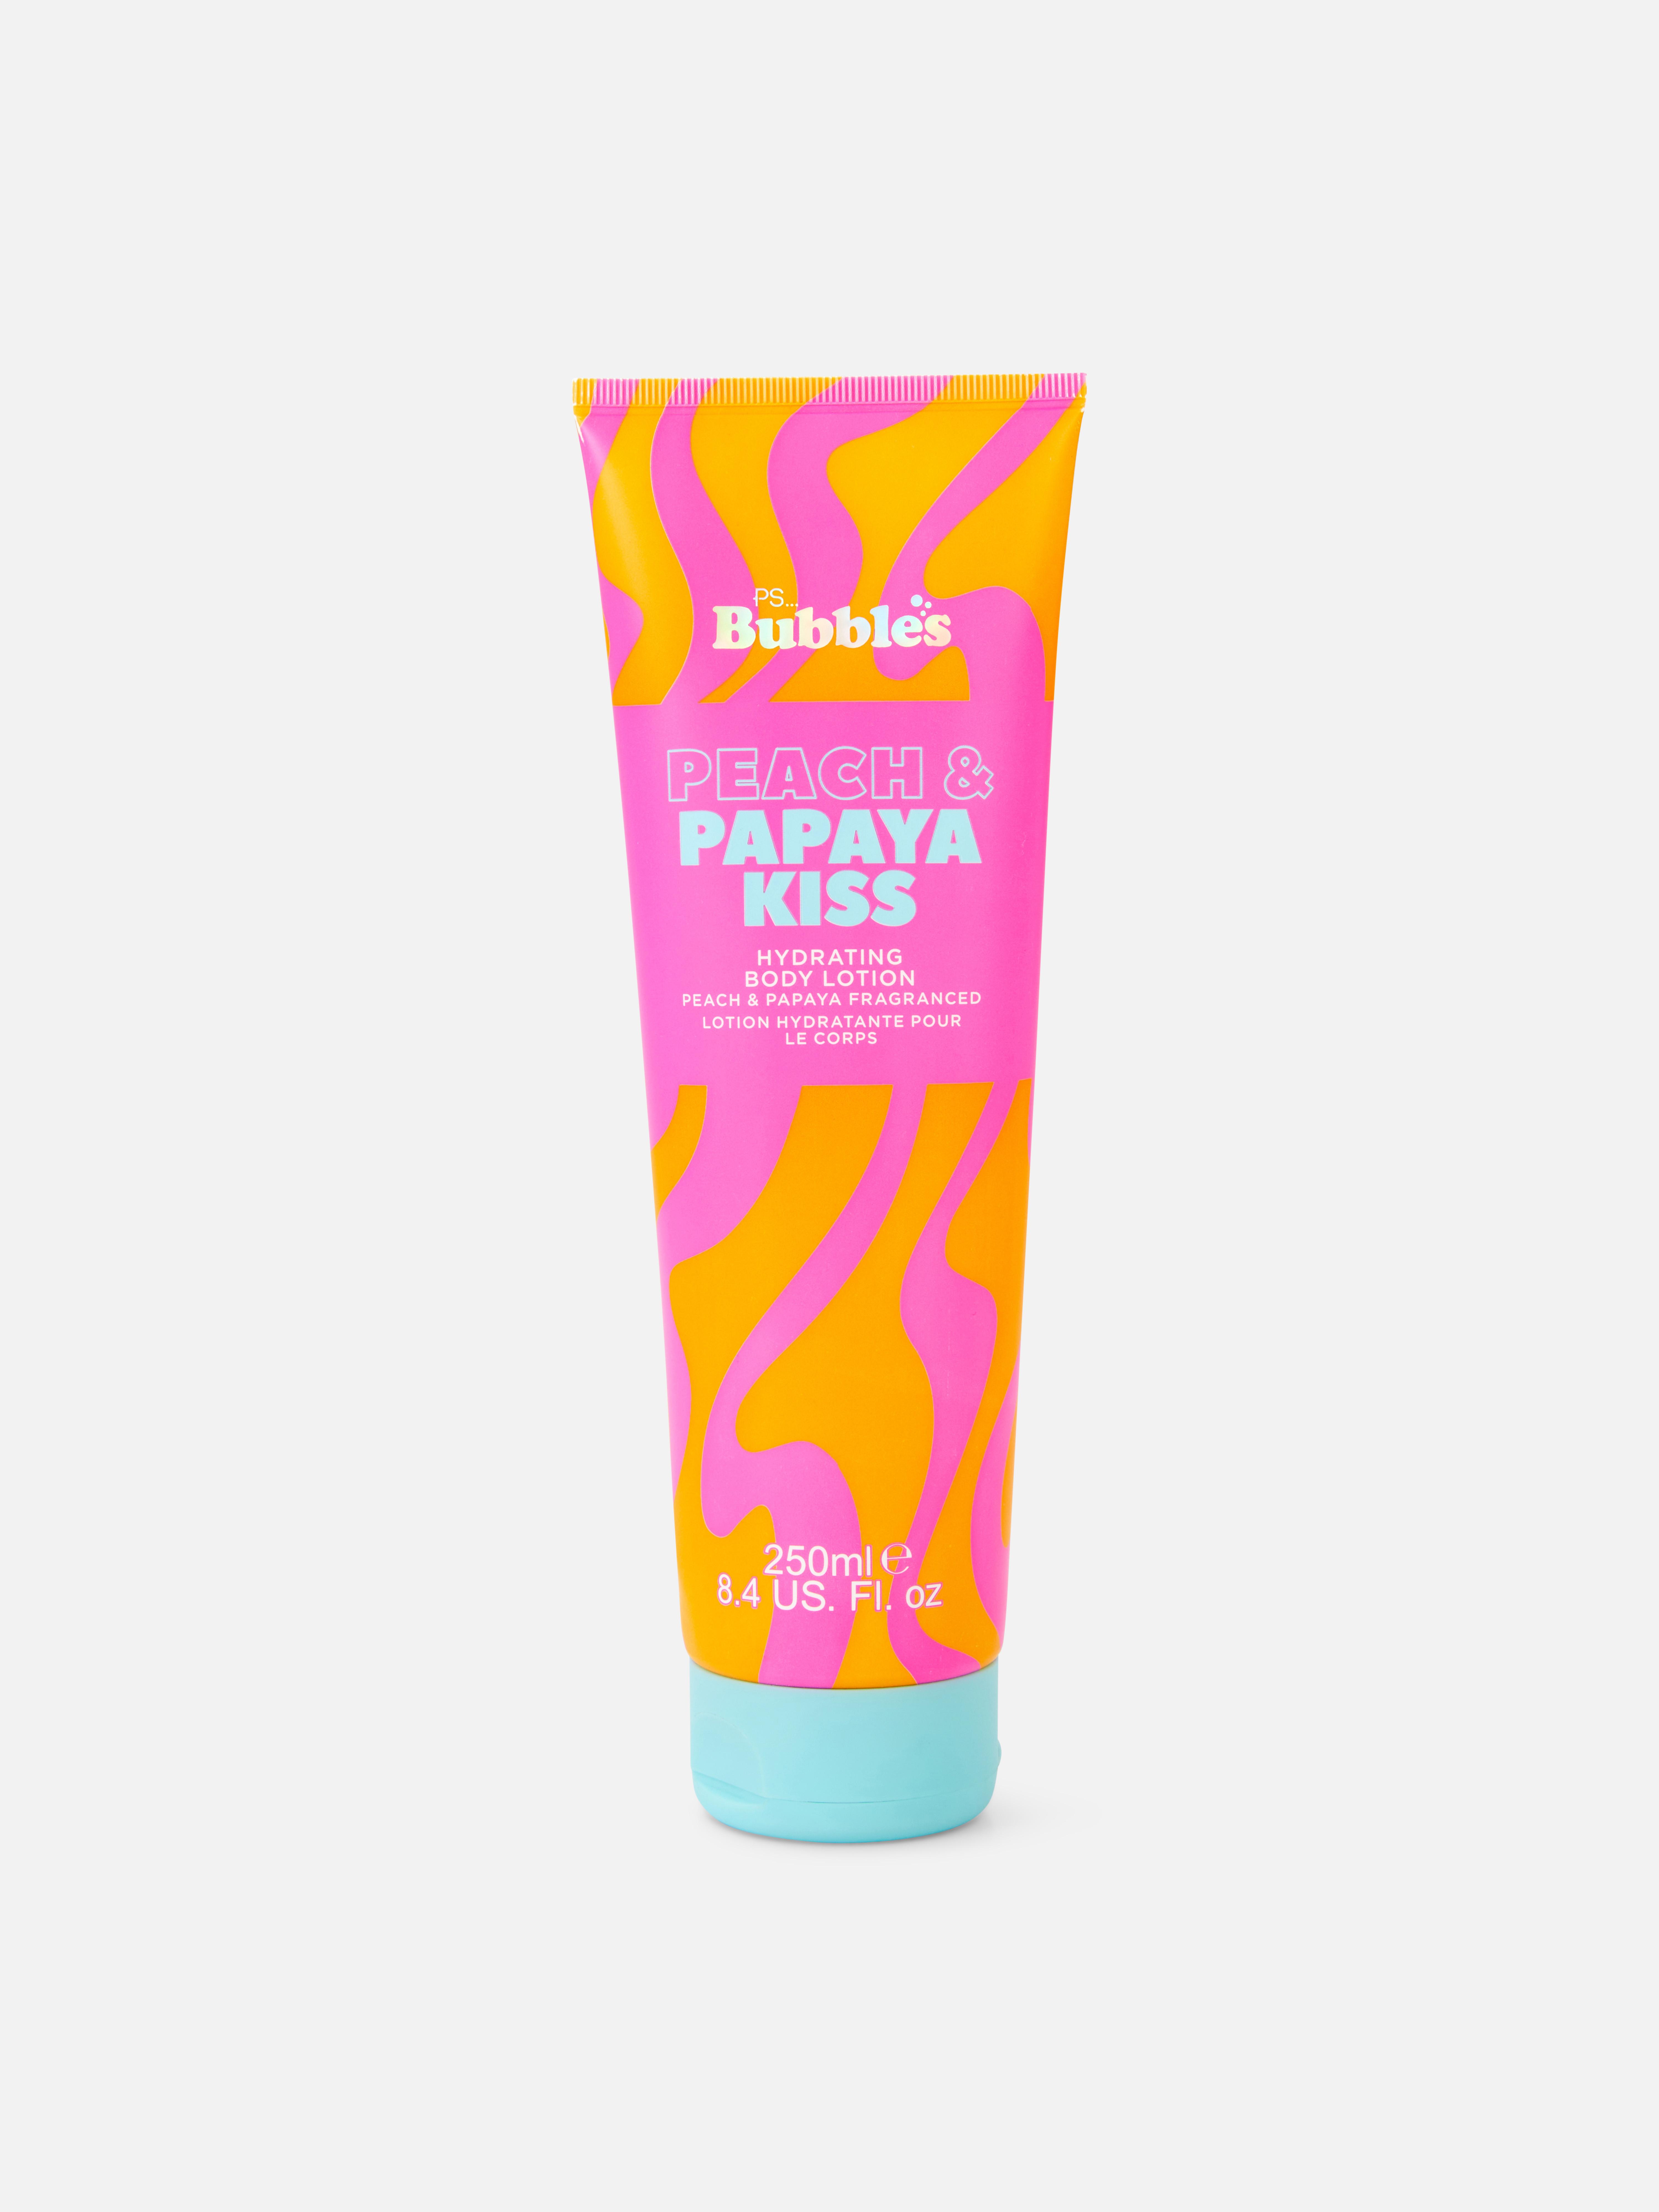 PS... Bubbles Scented Body Lotion